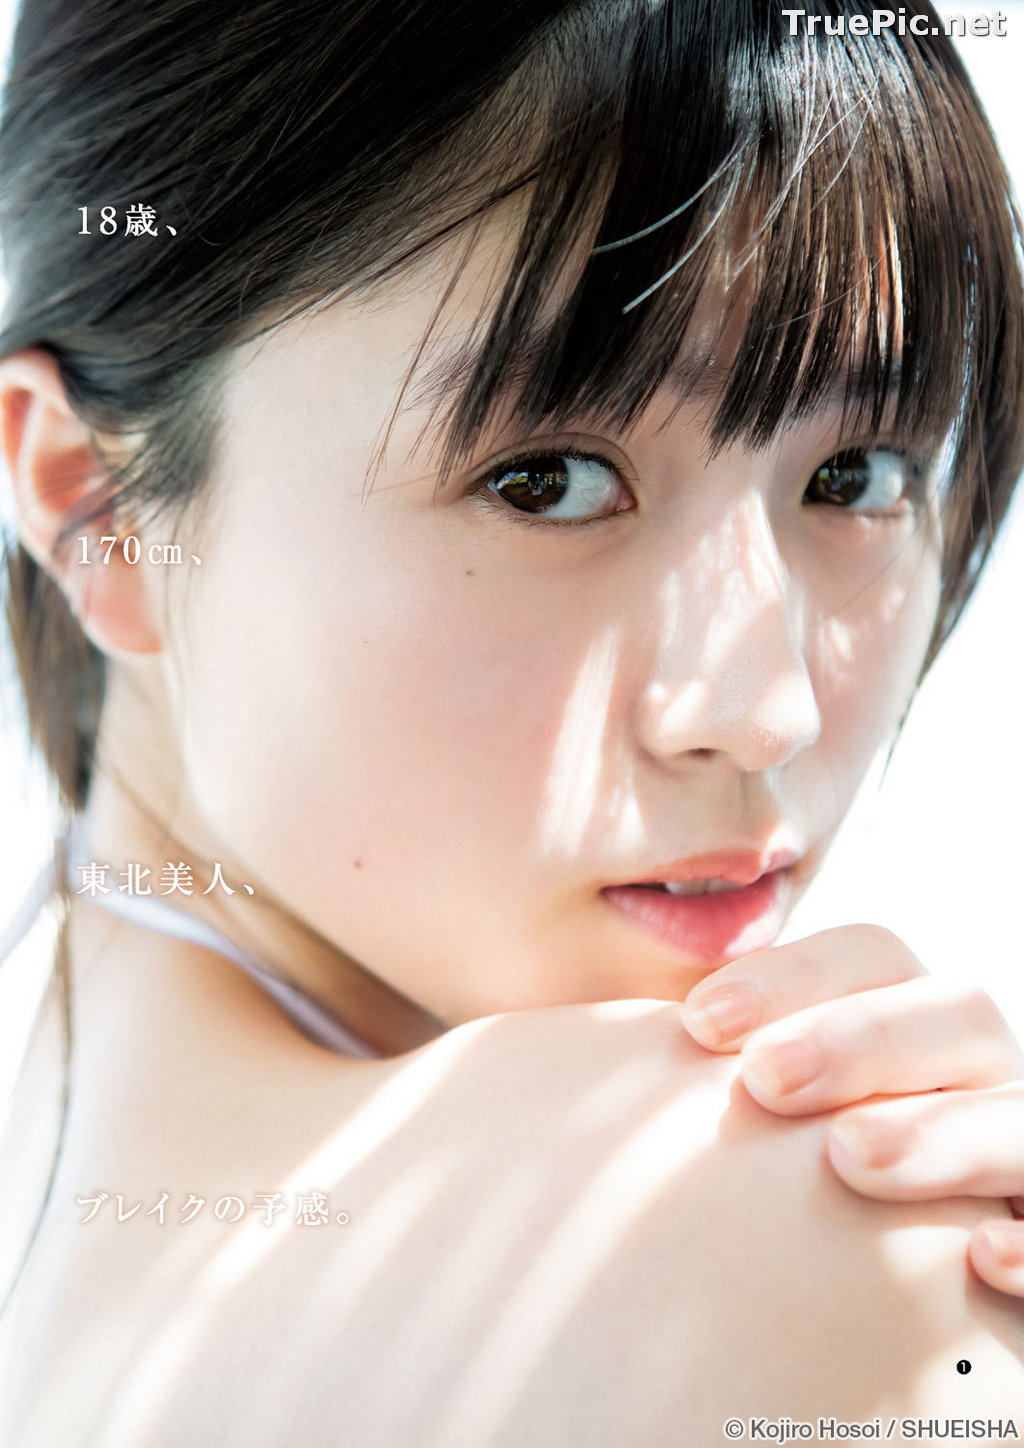 ImageJapanese Gravure Idol and Actress - Kitamuki Miyu (北向珠夕) - Sexy Picture Collection 2020 - TruePic.net - Picture-102